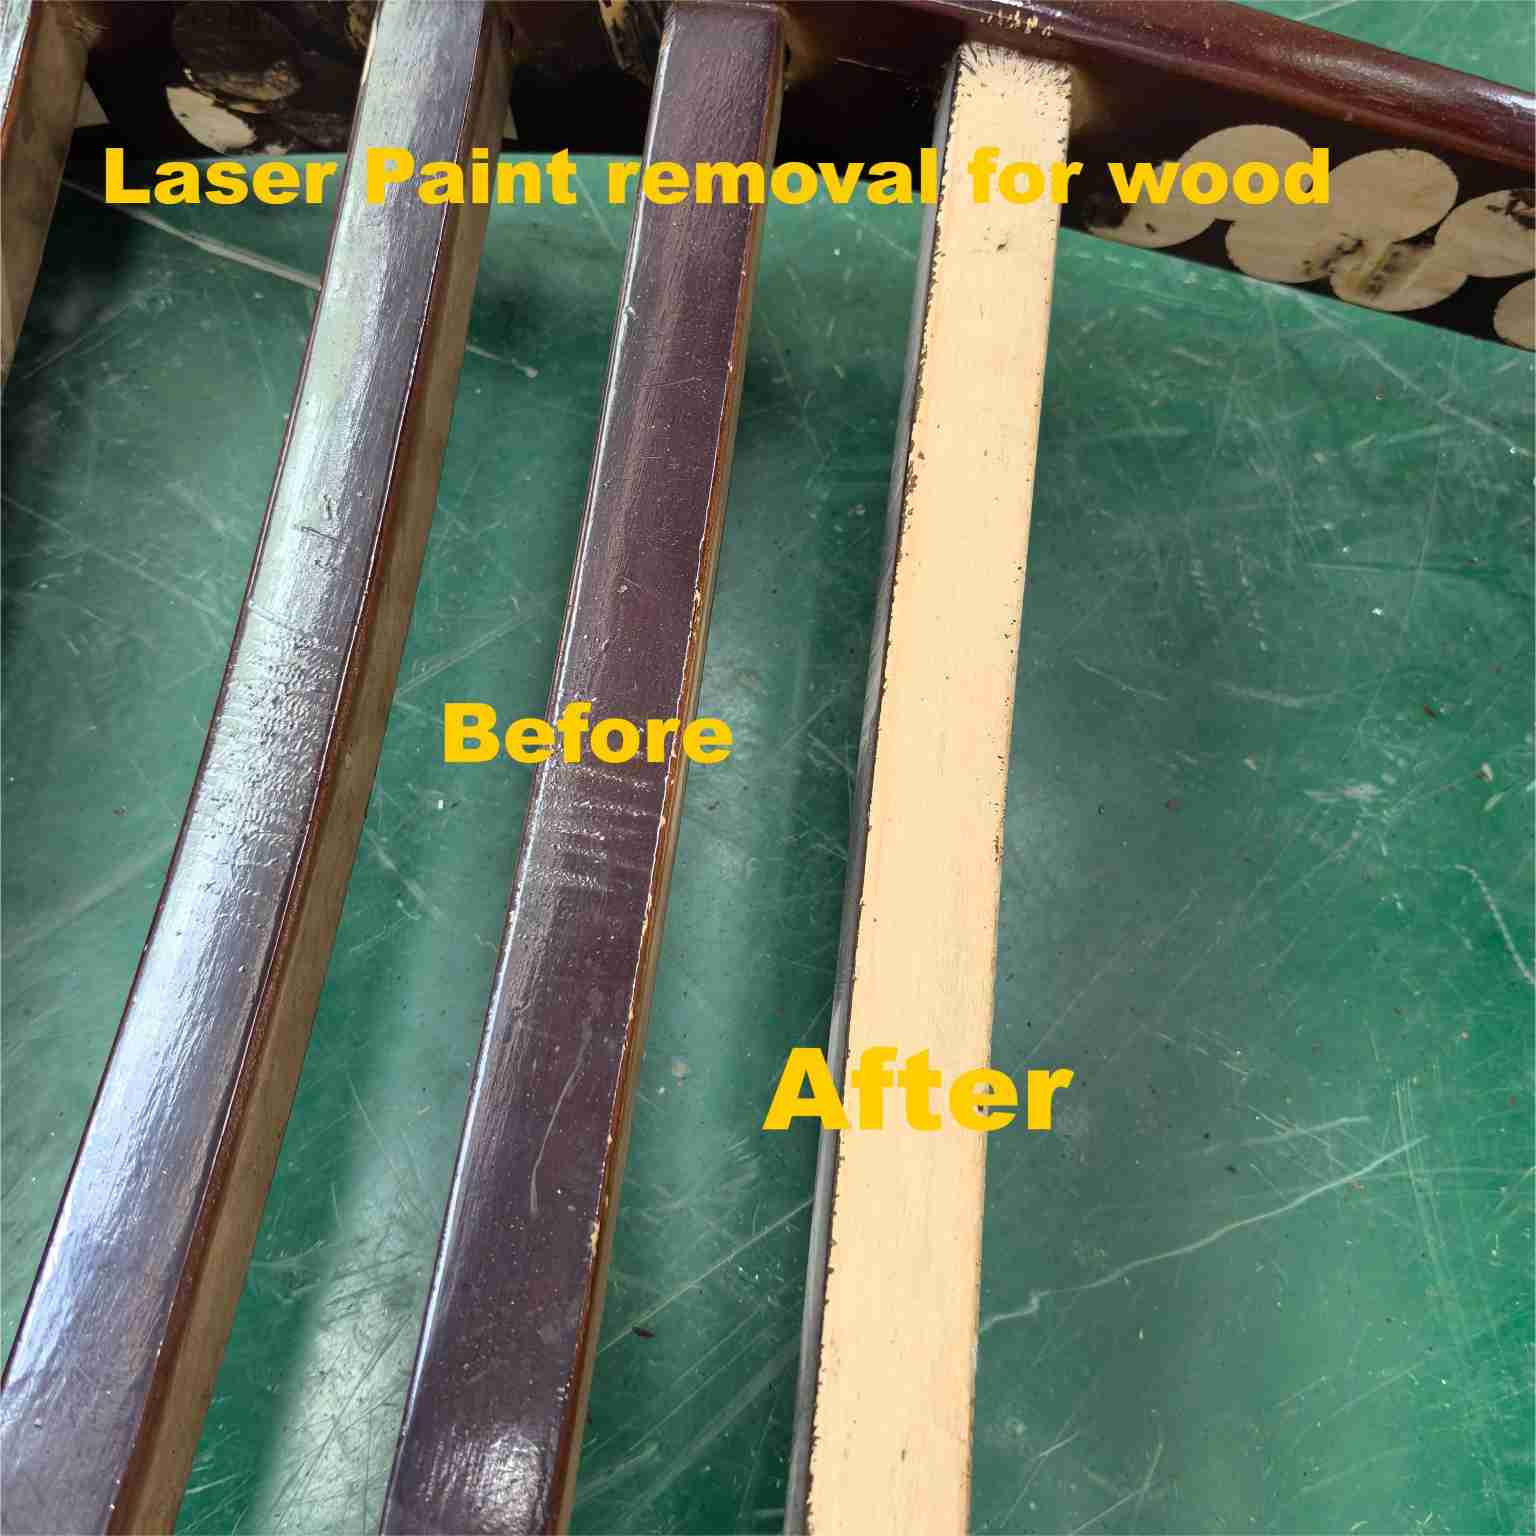 Laser-paint-removal-for-wood-2